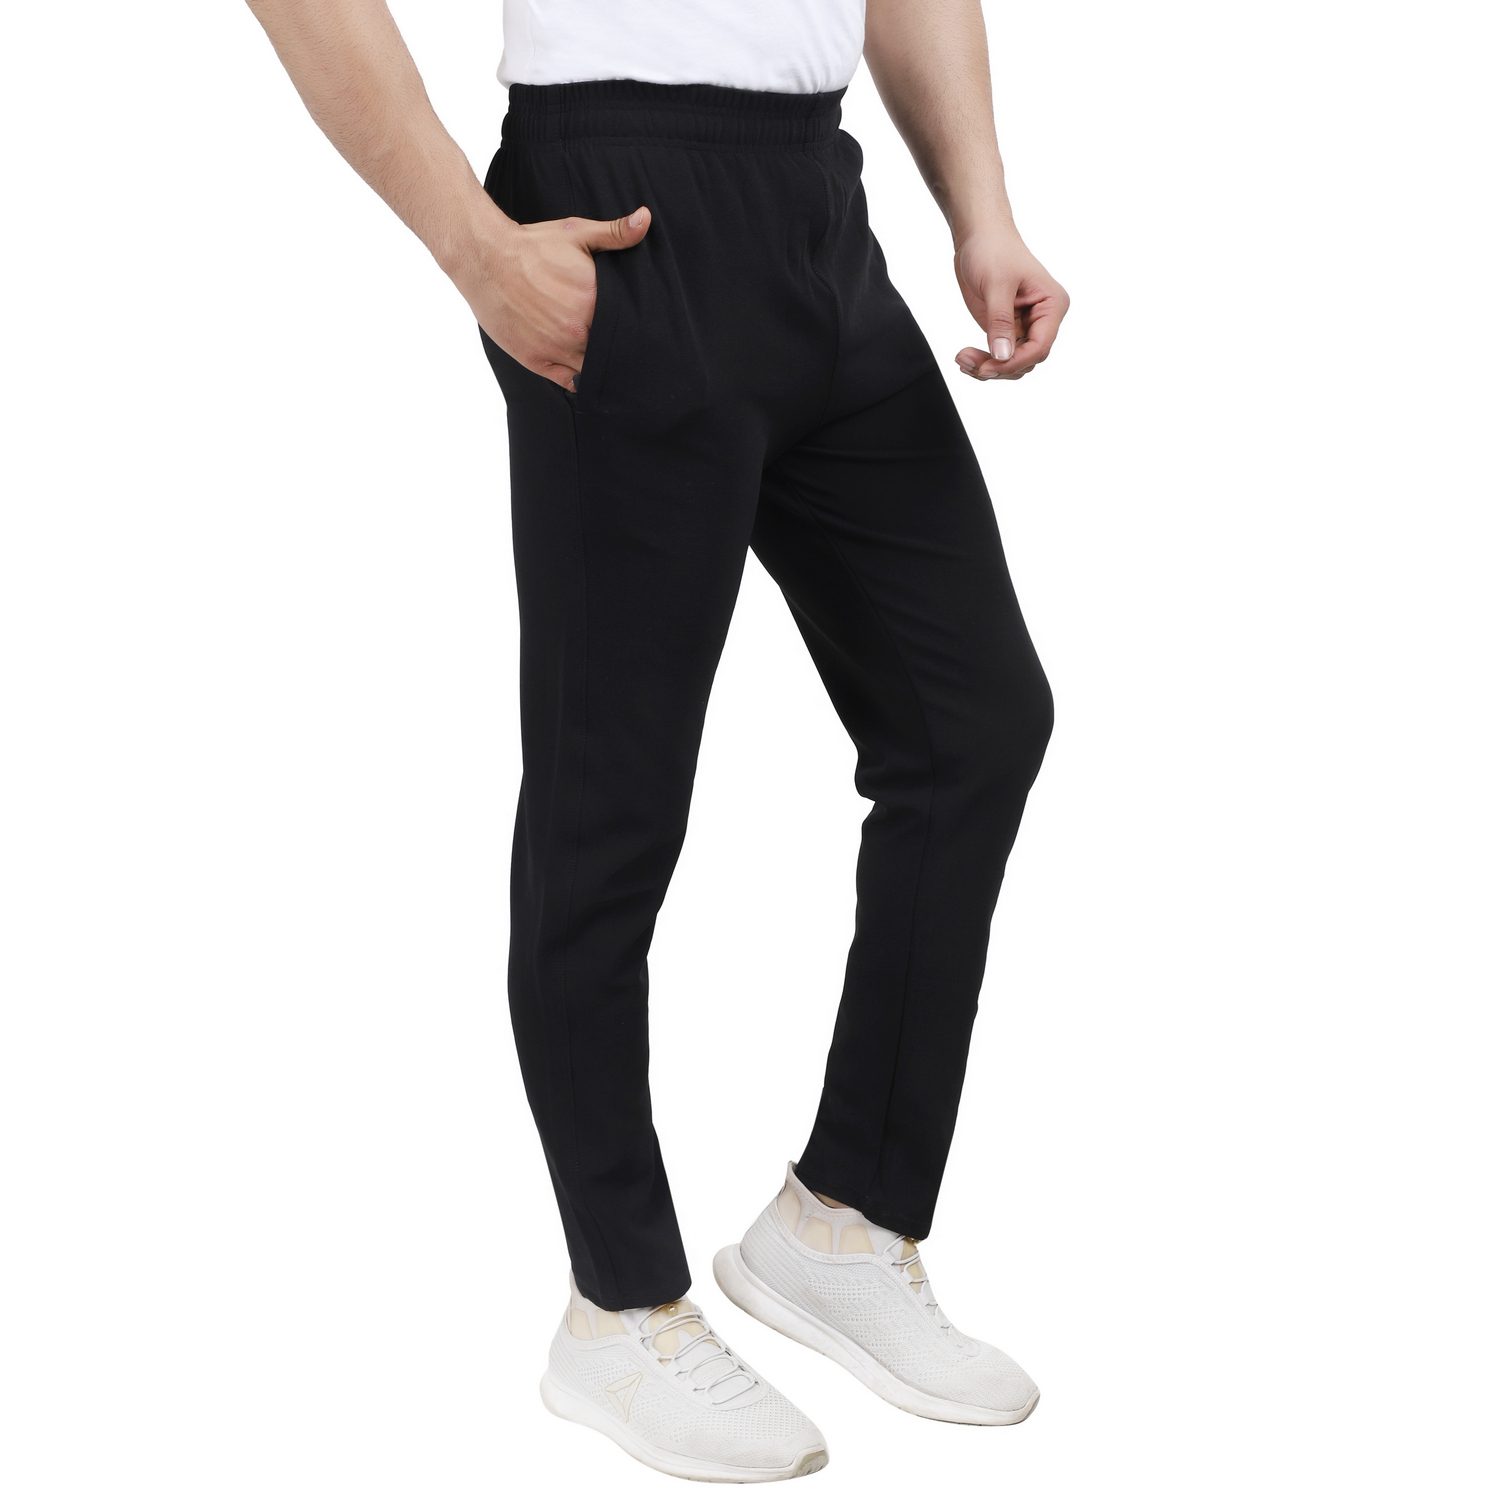 Buy NSZO Men Solid Black Track Pant Online @ ₹369 from ShopClues